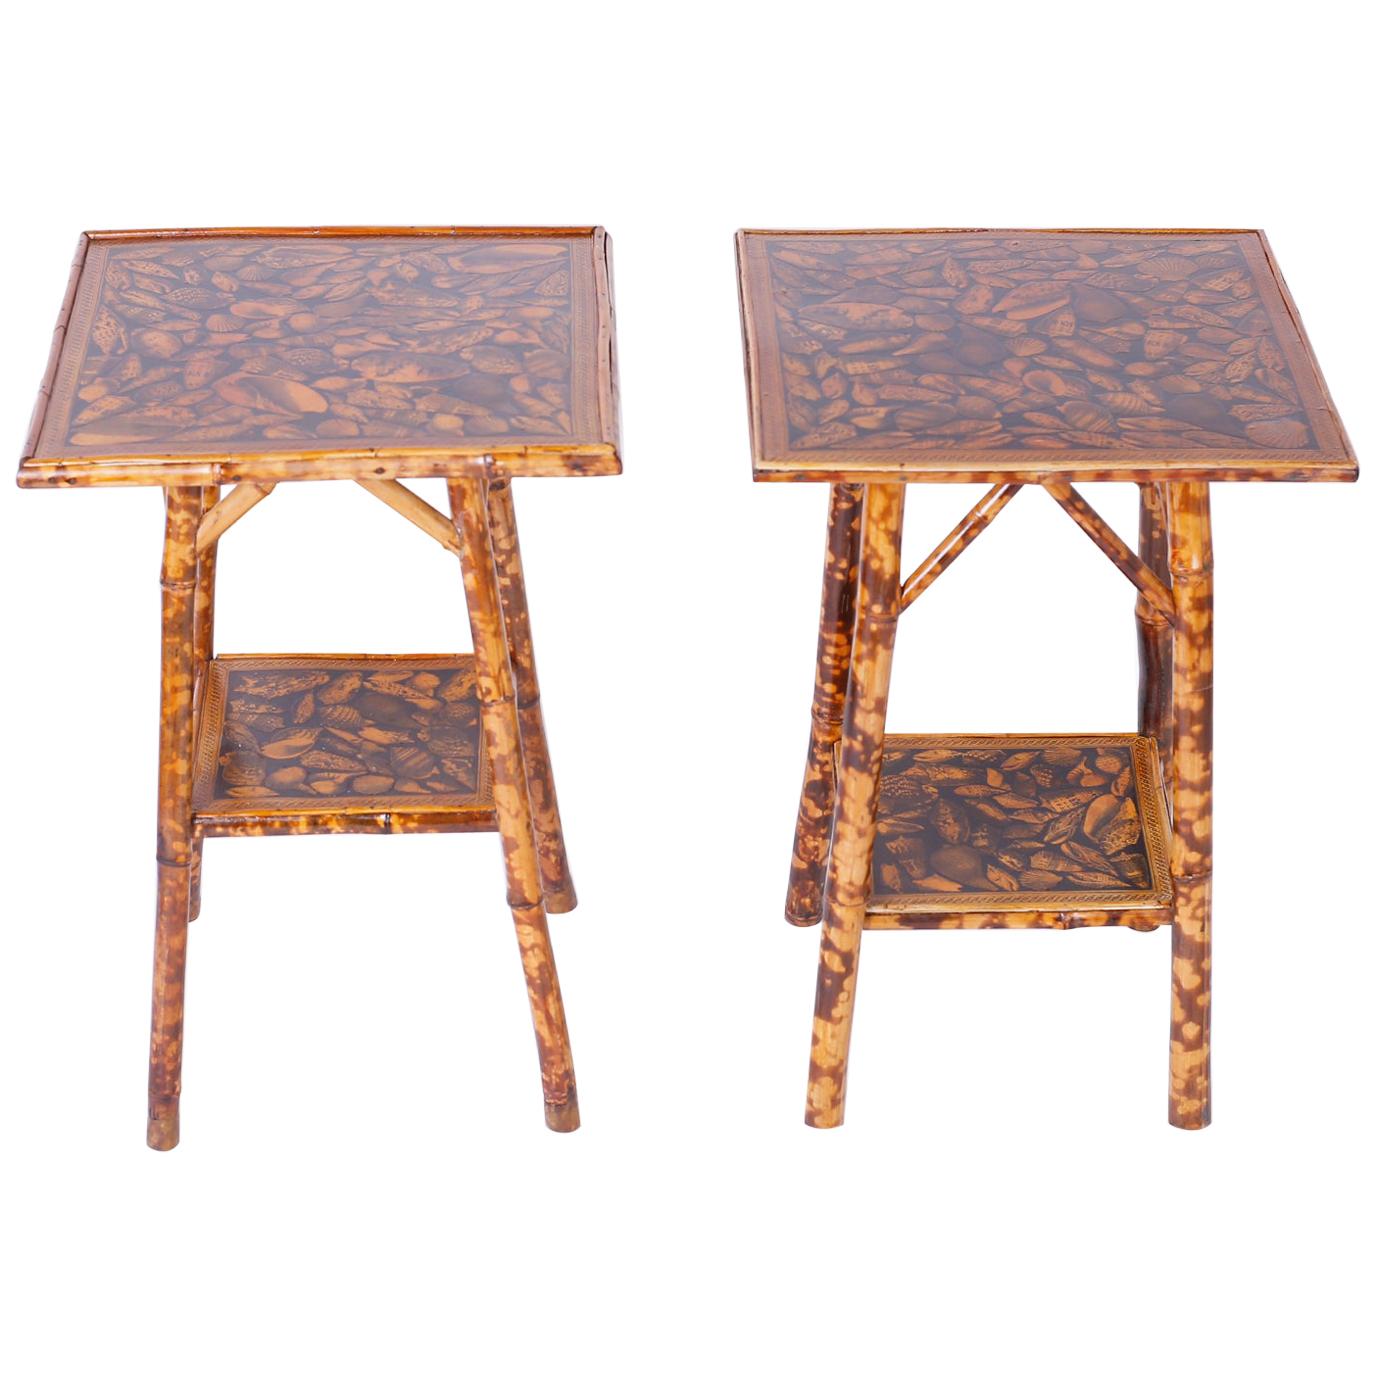 Pair of Bamboo Tables with Seashell Decoupage Tops